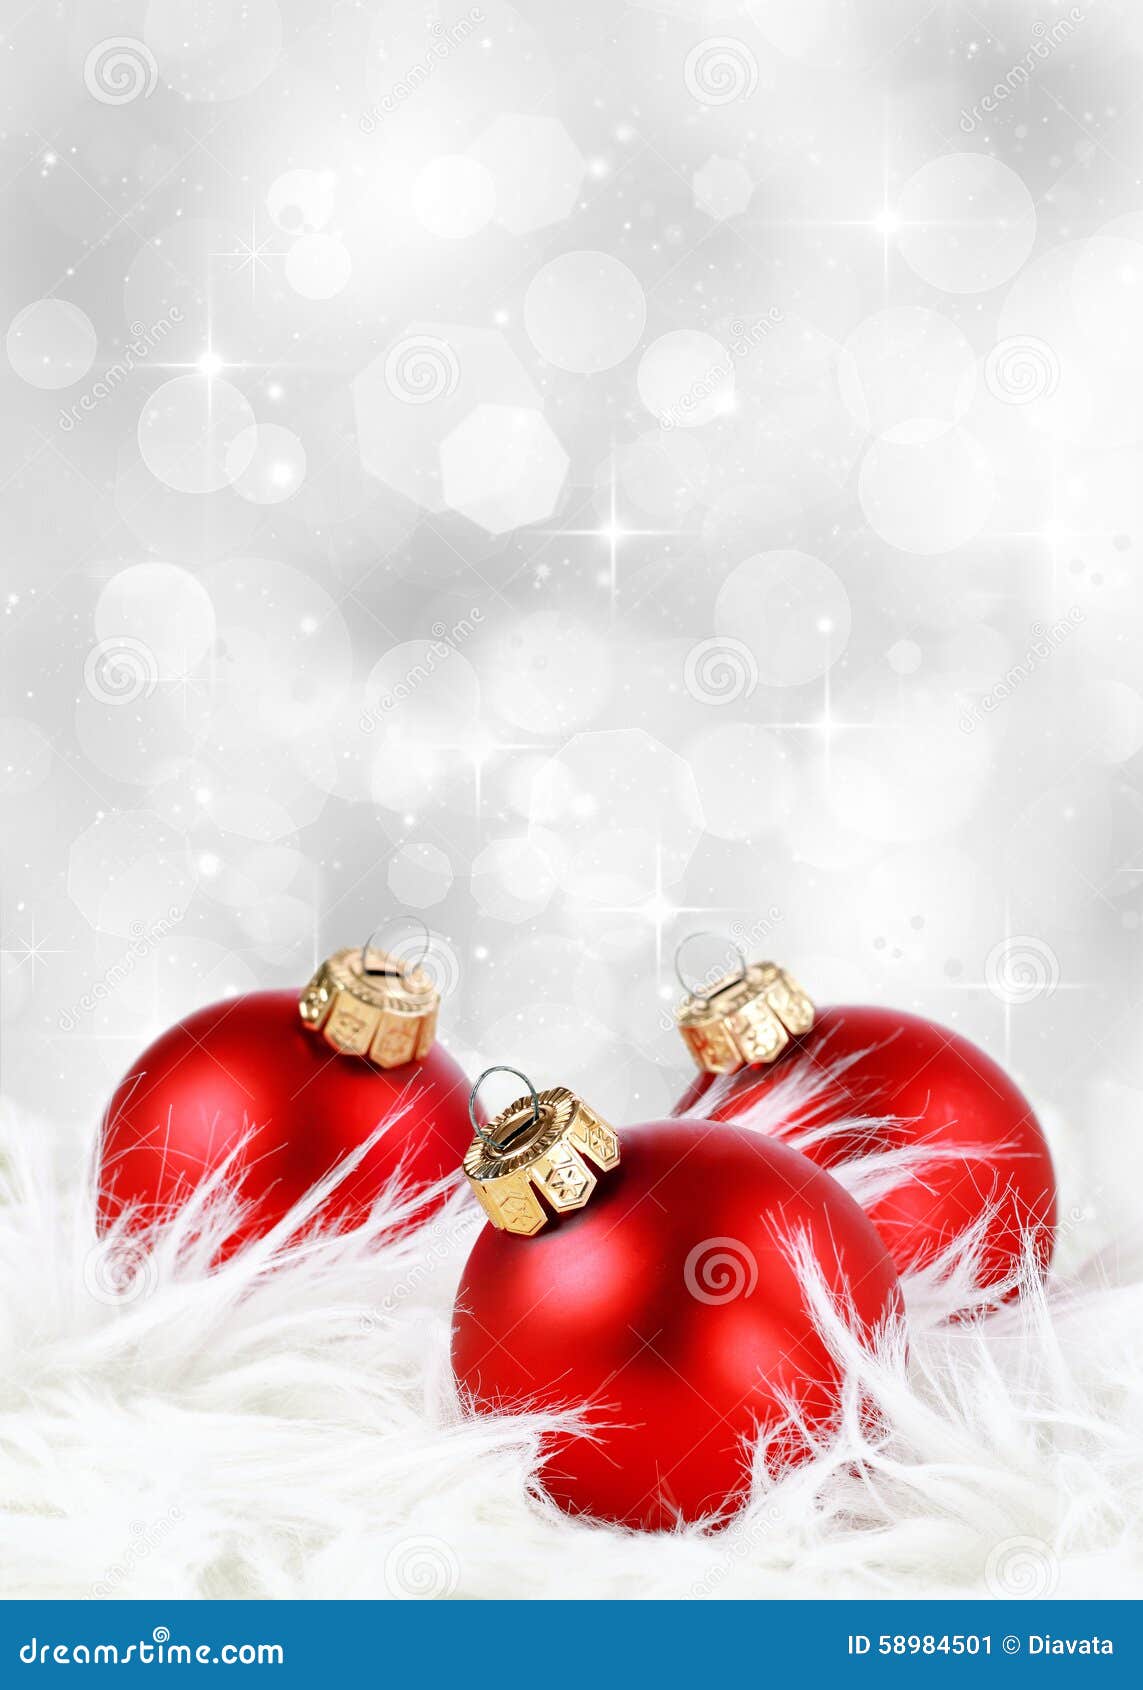 Christmas Background With Red Ornaments On Feathers And A ...
